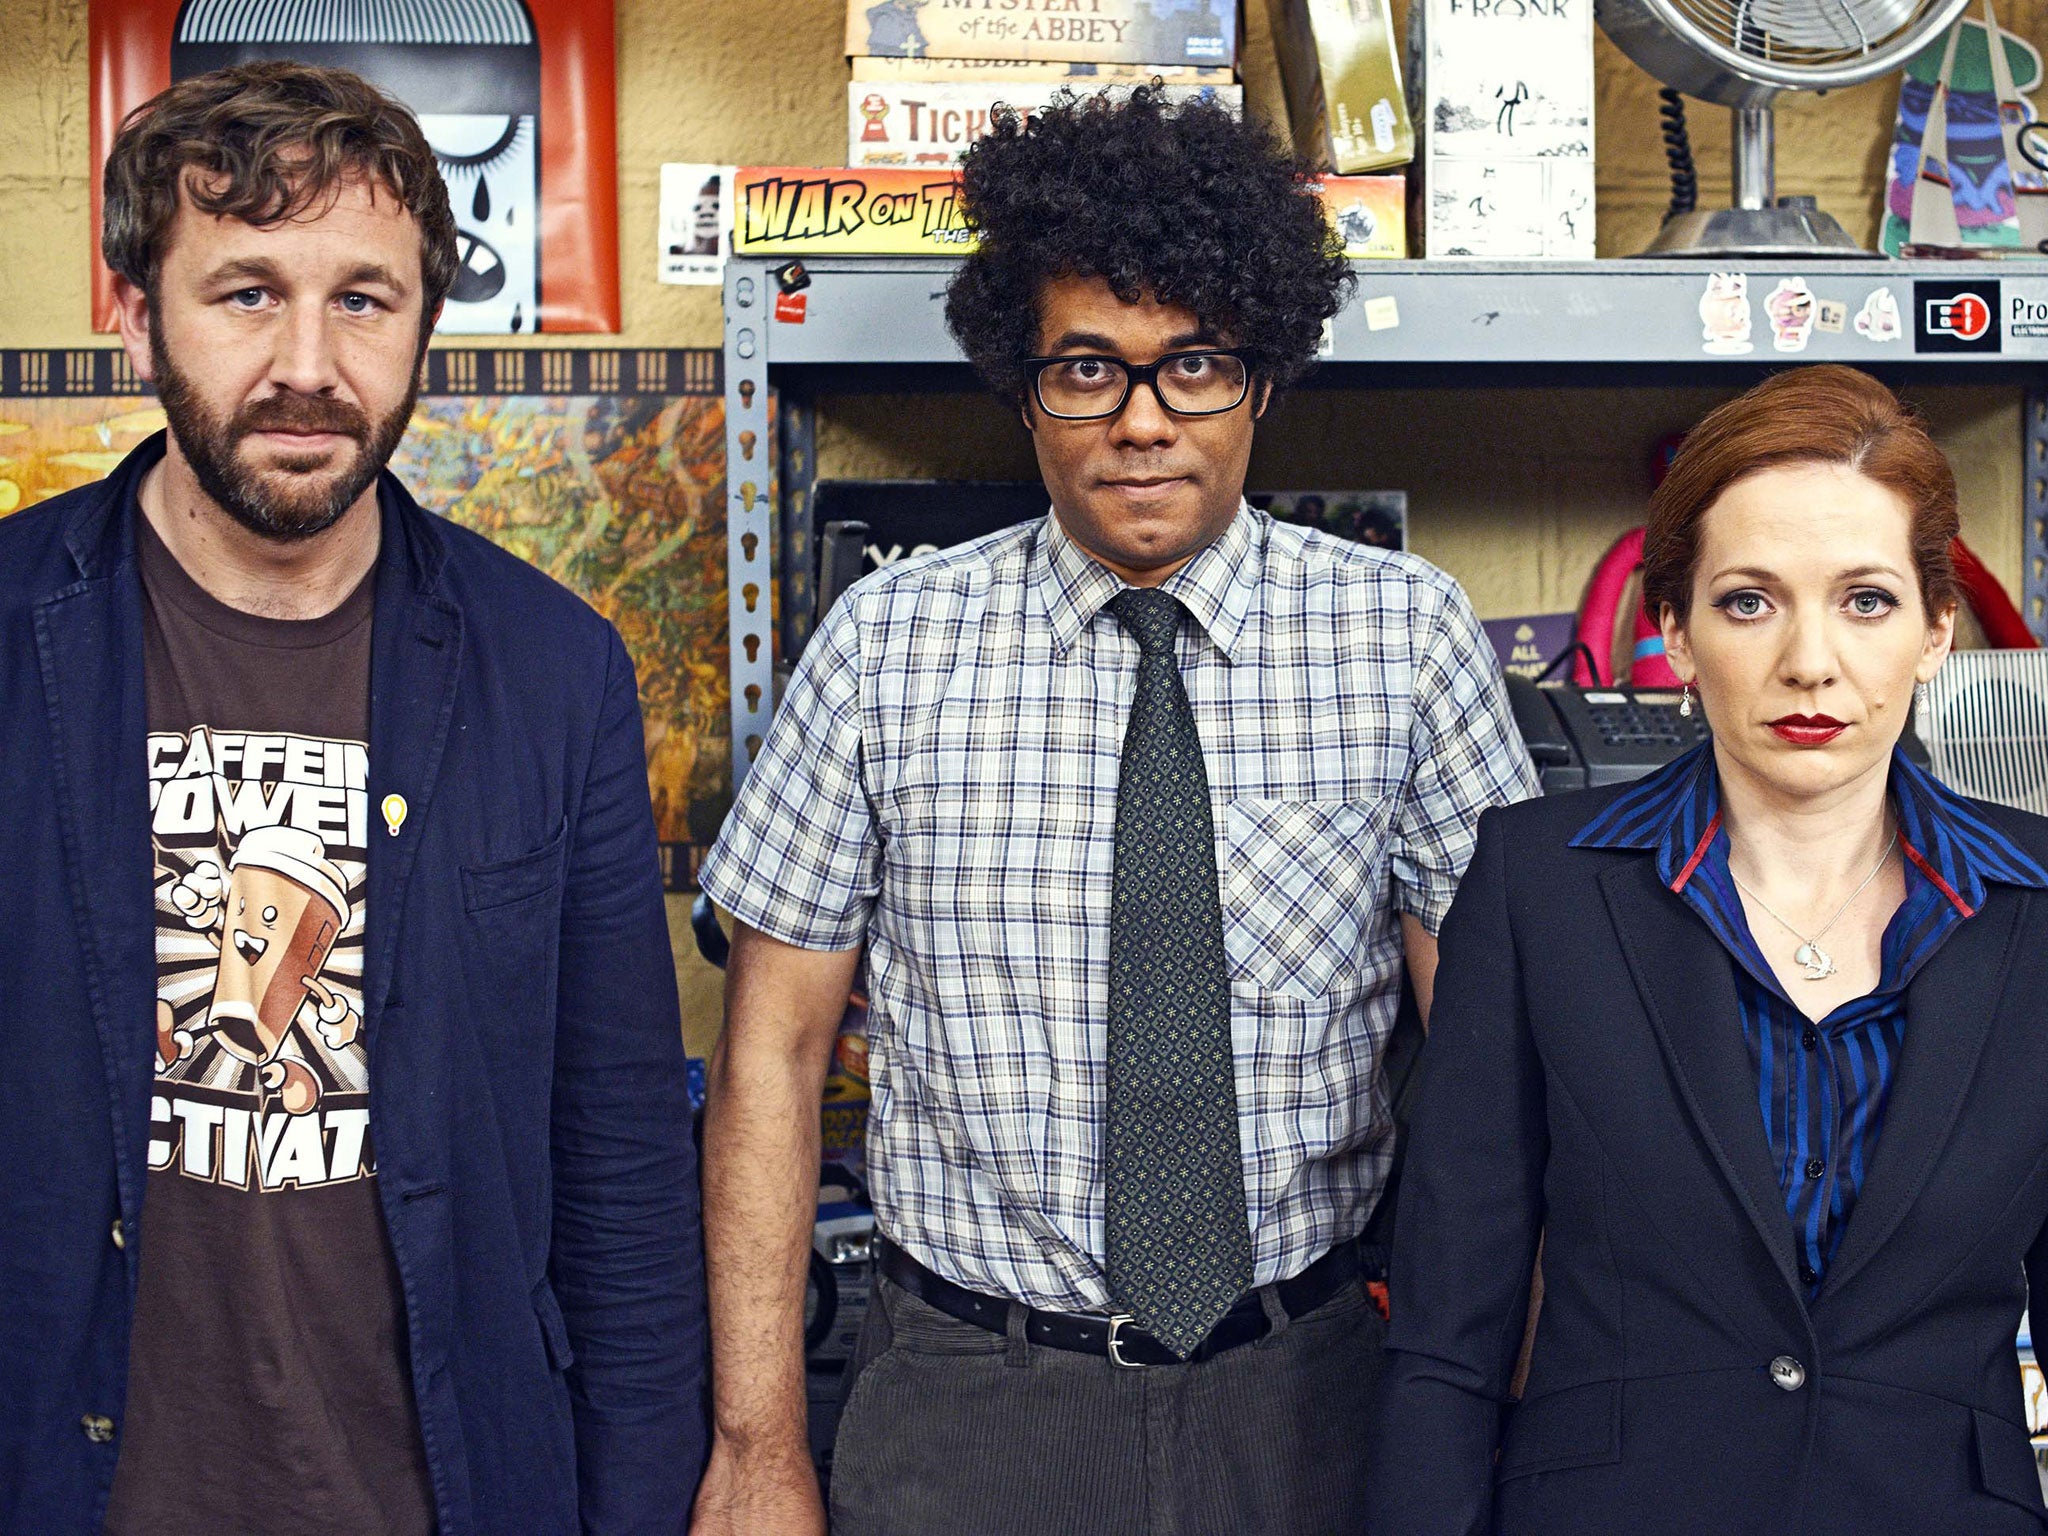 Chris O’Dowd, Richard Ayoade and Katherine Parkinson star in The IT Crowd, which leads the way with four nominations at the 2014 Bafta TV awards